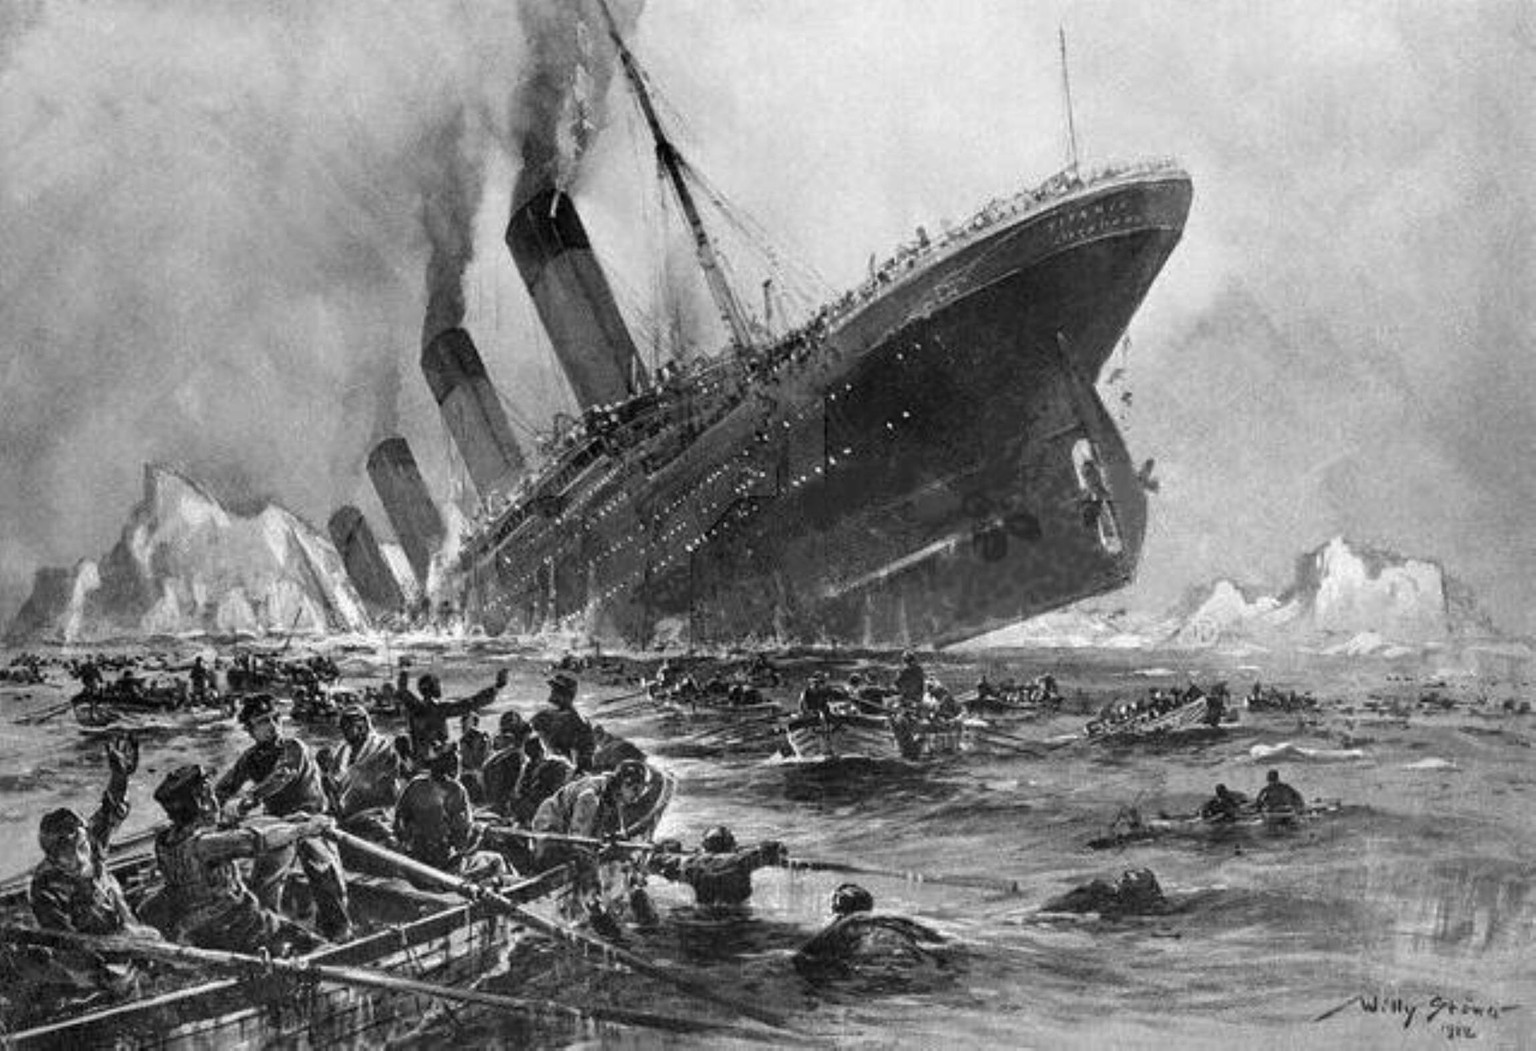 April 13, 2012 - With the 100th Anniversary of the Titanic sinking, the world remembers those who lost their lives on the unsinkable ship. Sunday marks the anniversary of the HMS Titanic after a colli ...